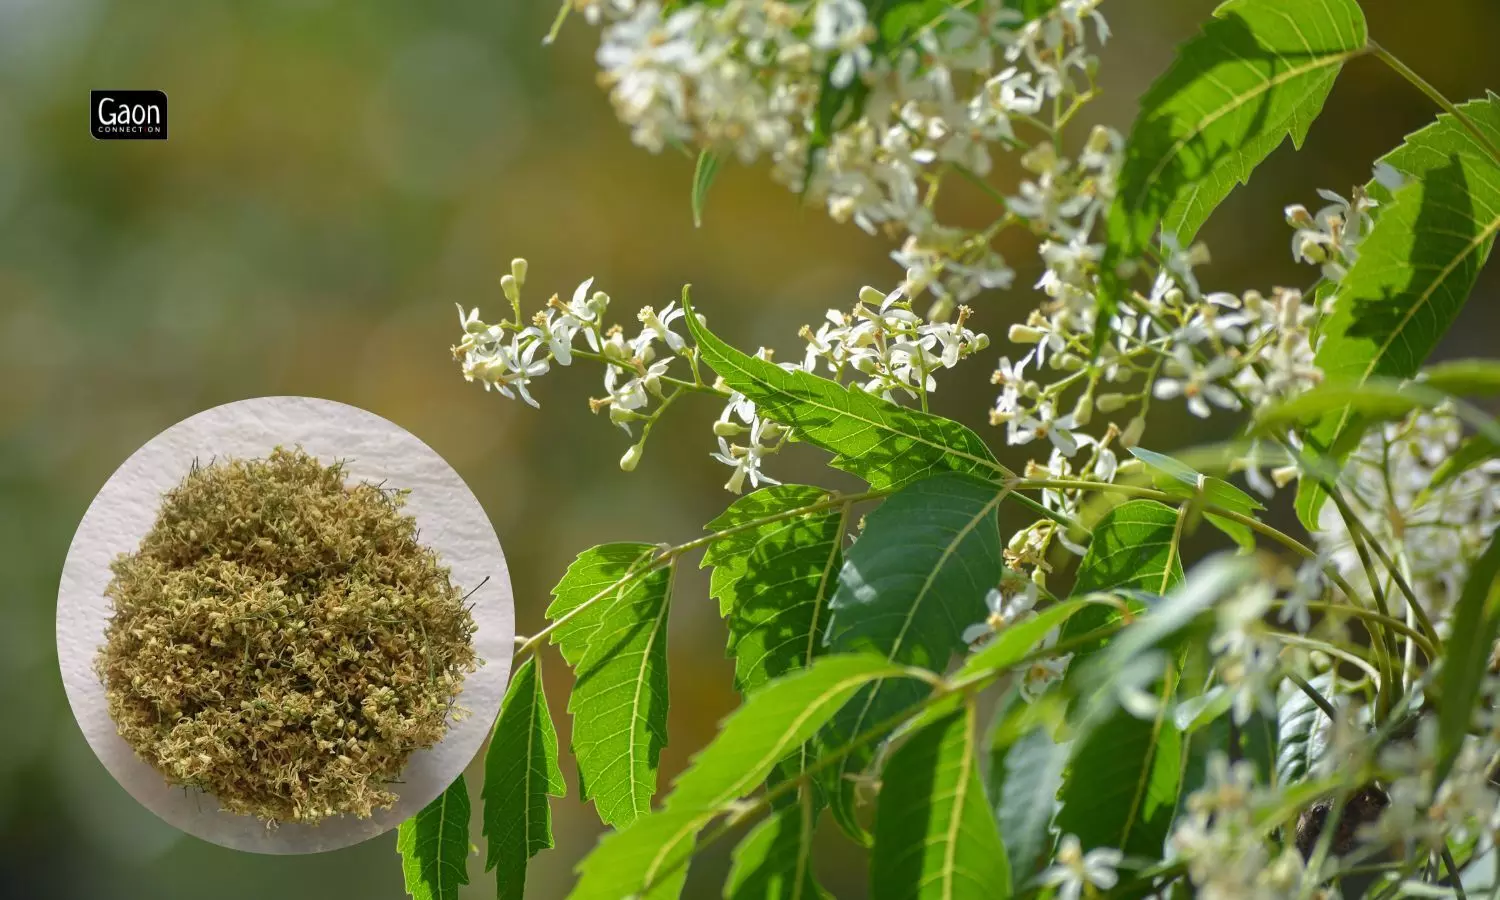 The Delicious Neem Blossoms